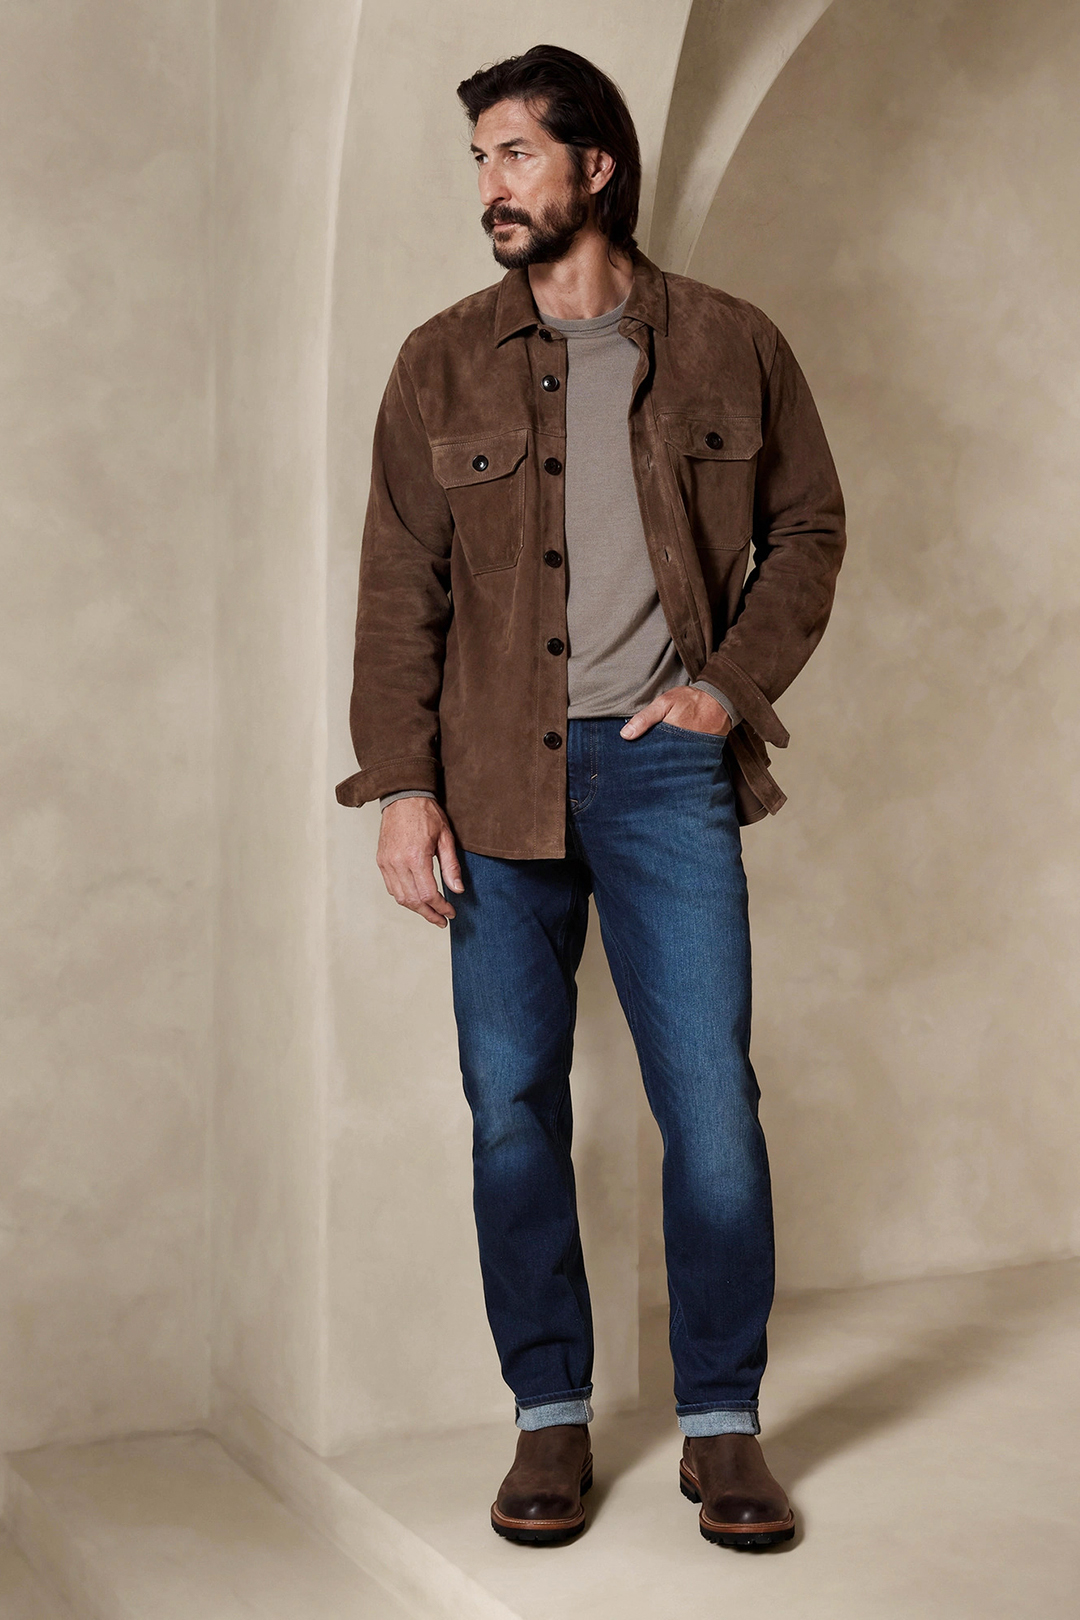 Wear brown suede jacket, grey crew neck sweater, blue denim jeans, and brown Chelsea boots